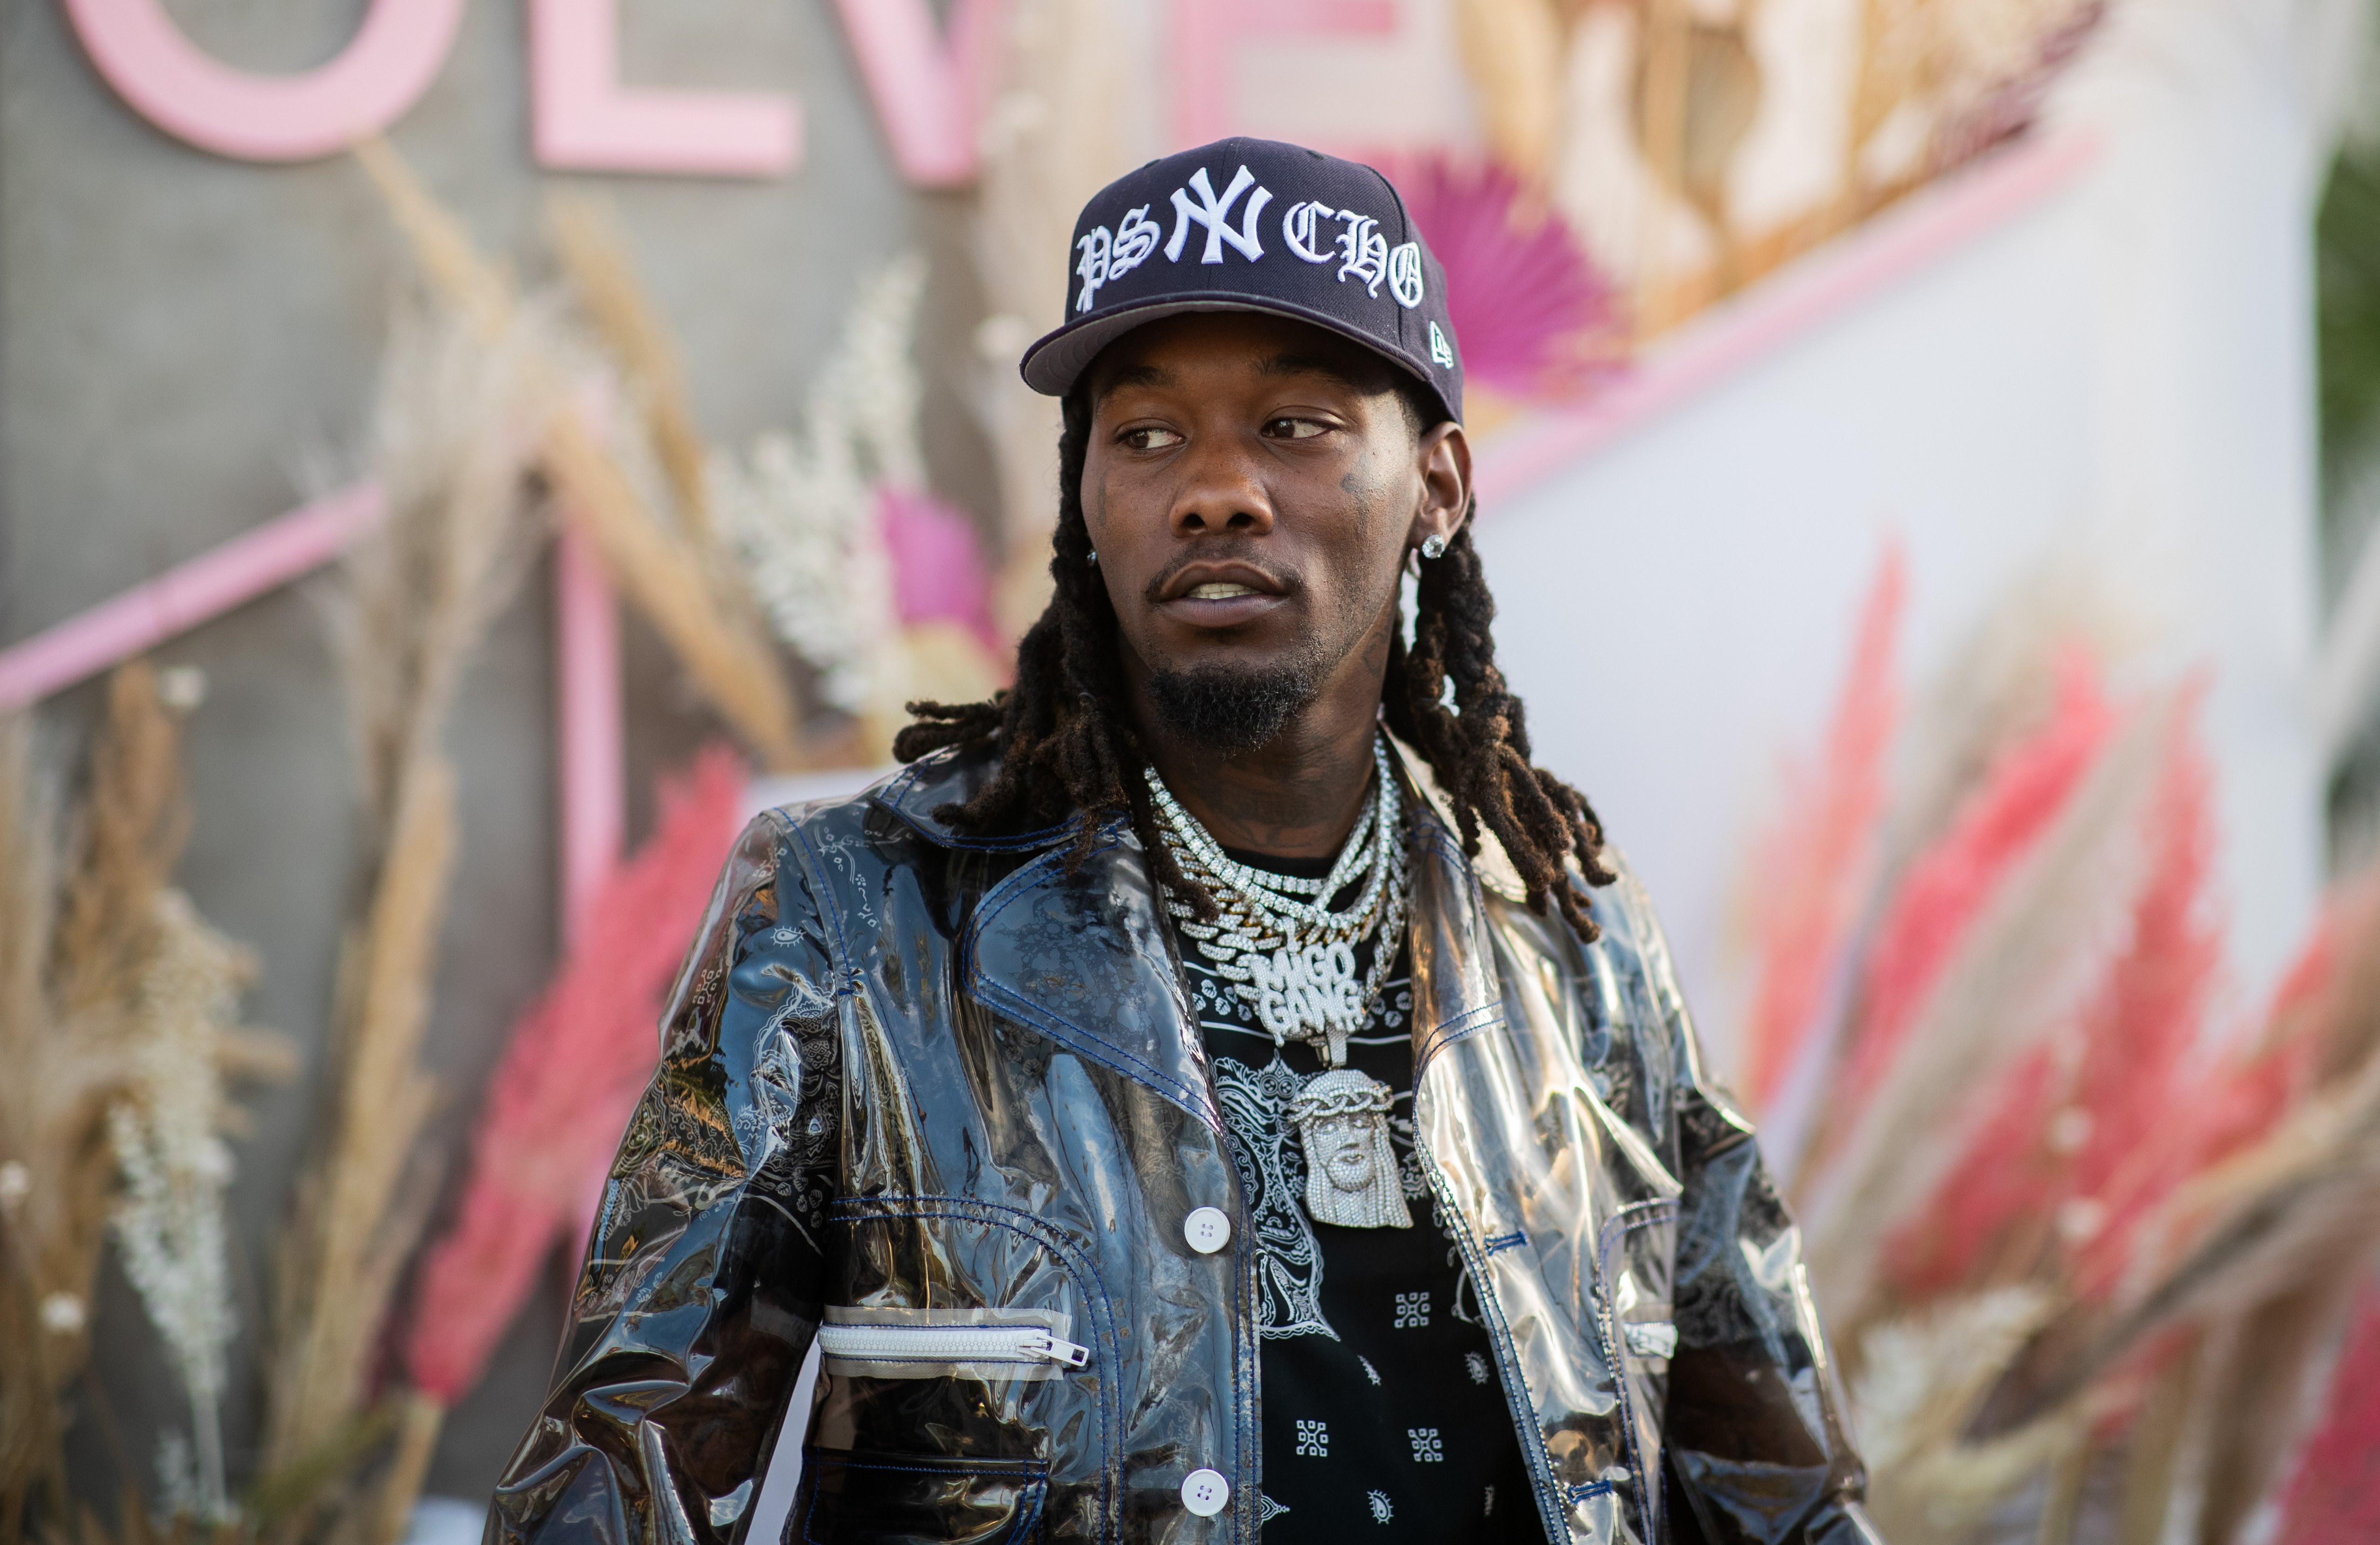 Offset attends the Revolve Festival in La Quinta, California on April 14, 2019 | Photo: Getty Images